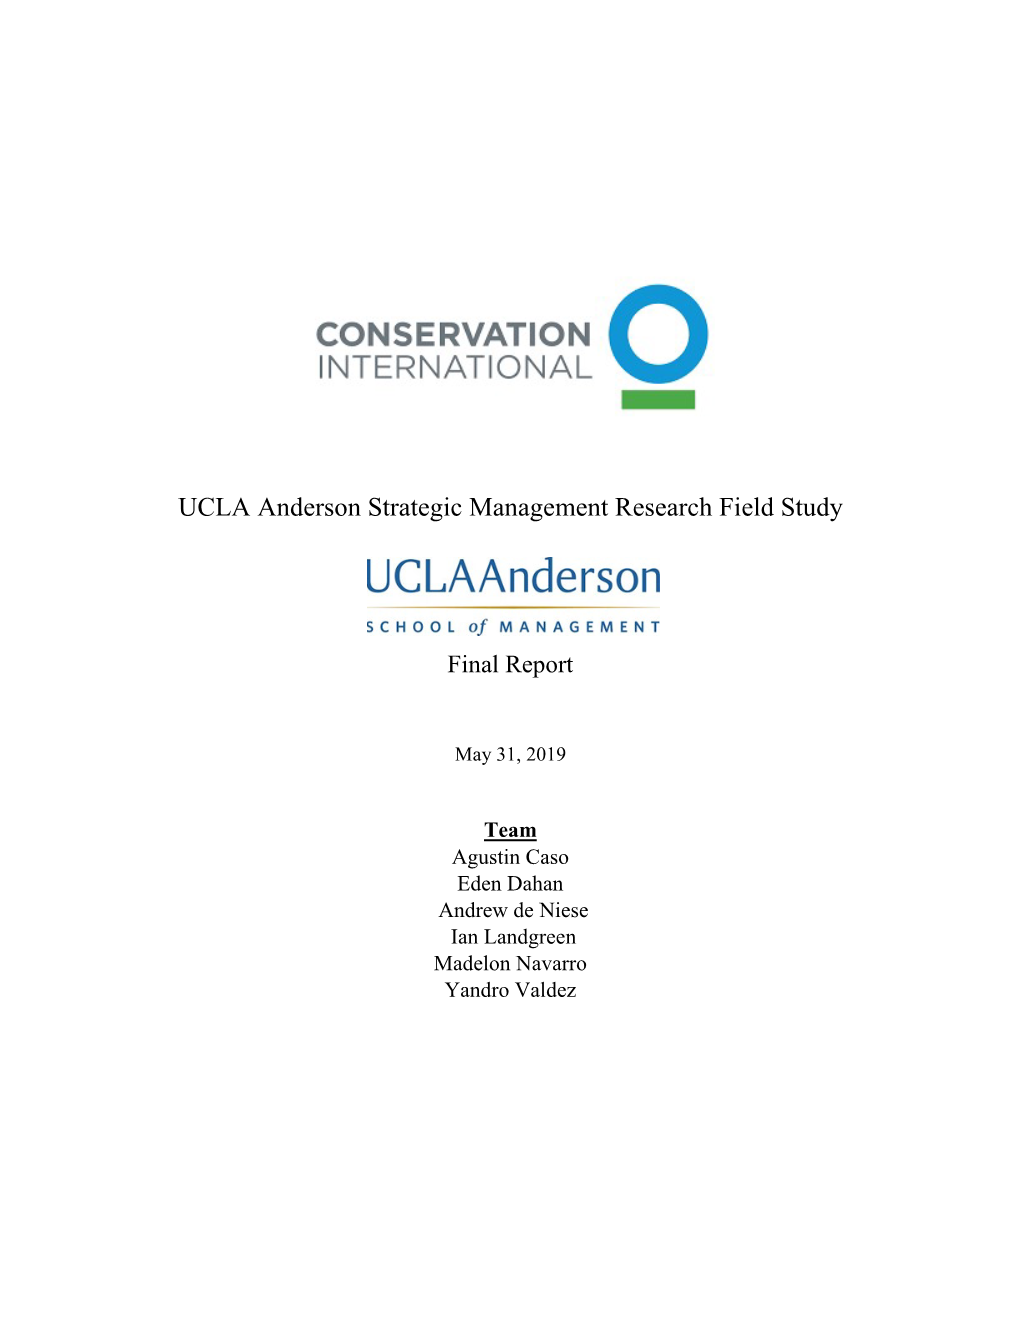 UCLA Anderson Strategic Management Research Field Study